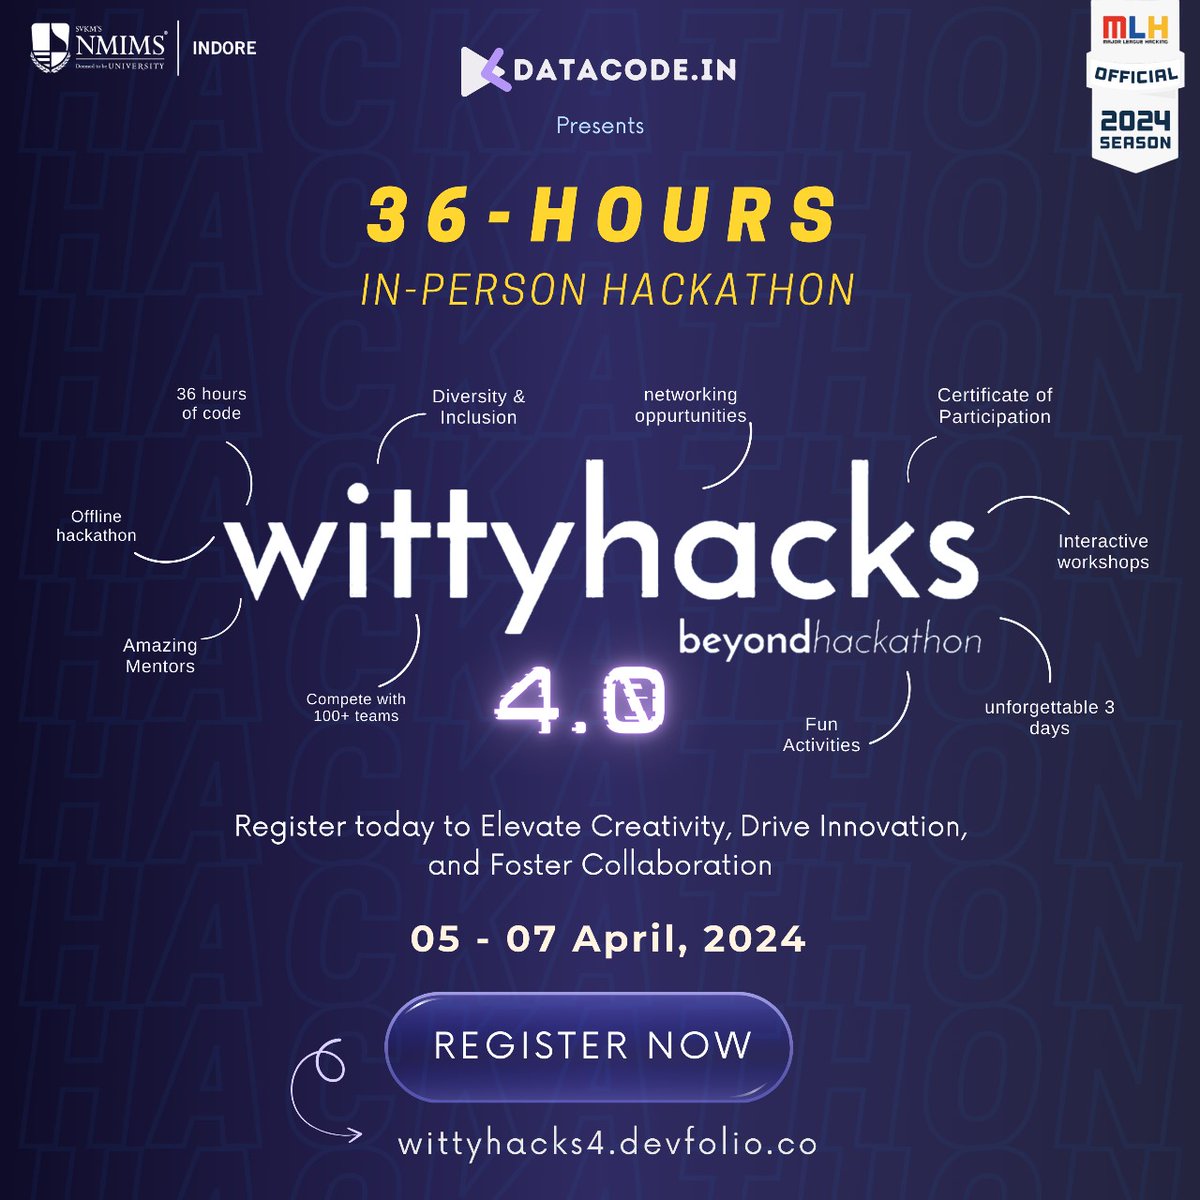 🚀 Ready to hack your way to greatness? Join us for Wittyhacks 4.0, Central India's premier 36-hour offline hackathon, happening on 5-7 April 2024 in India's cleanest city Indore. Secure your spot now at wittyhacks4.devfolio.co @Datacode_in @wittyhacks